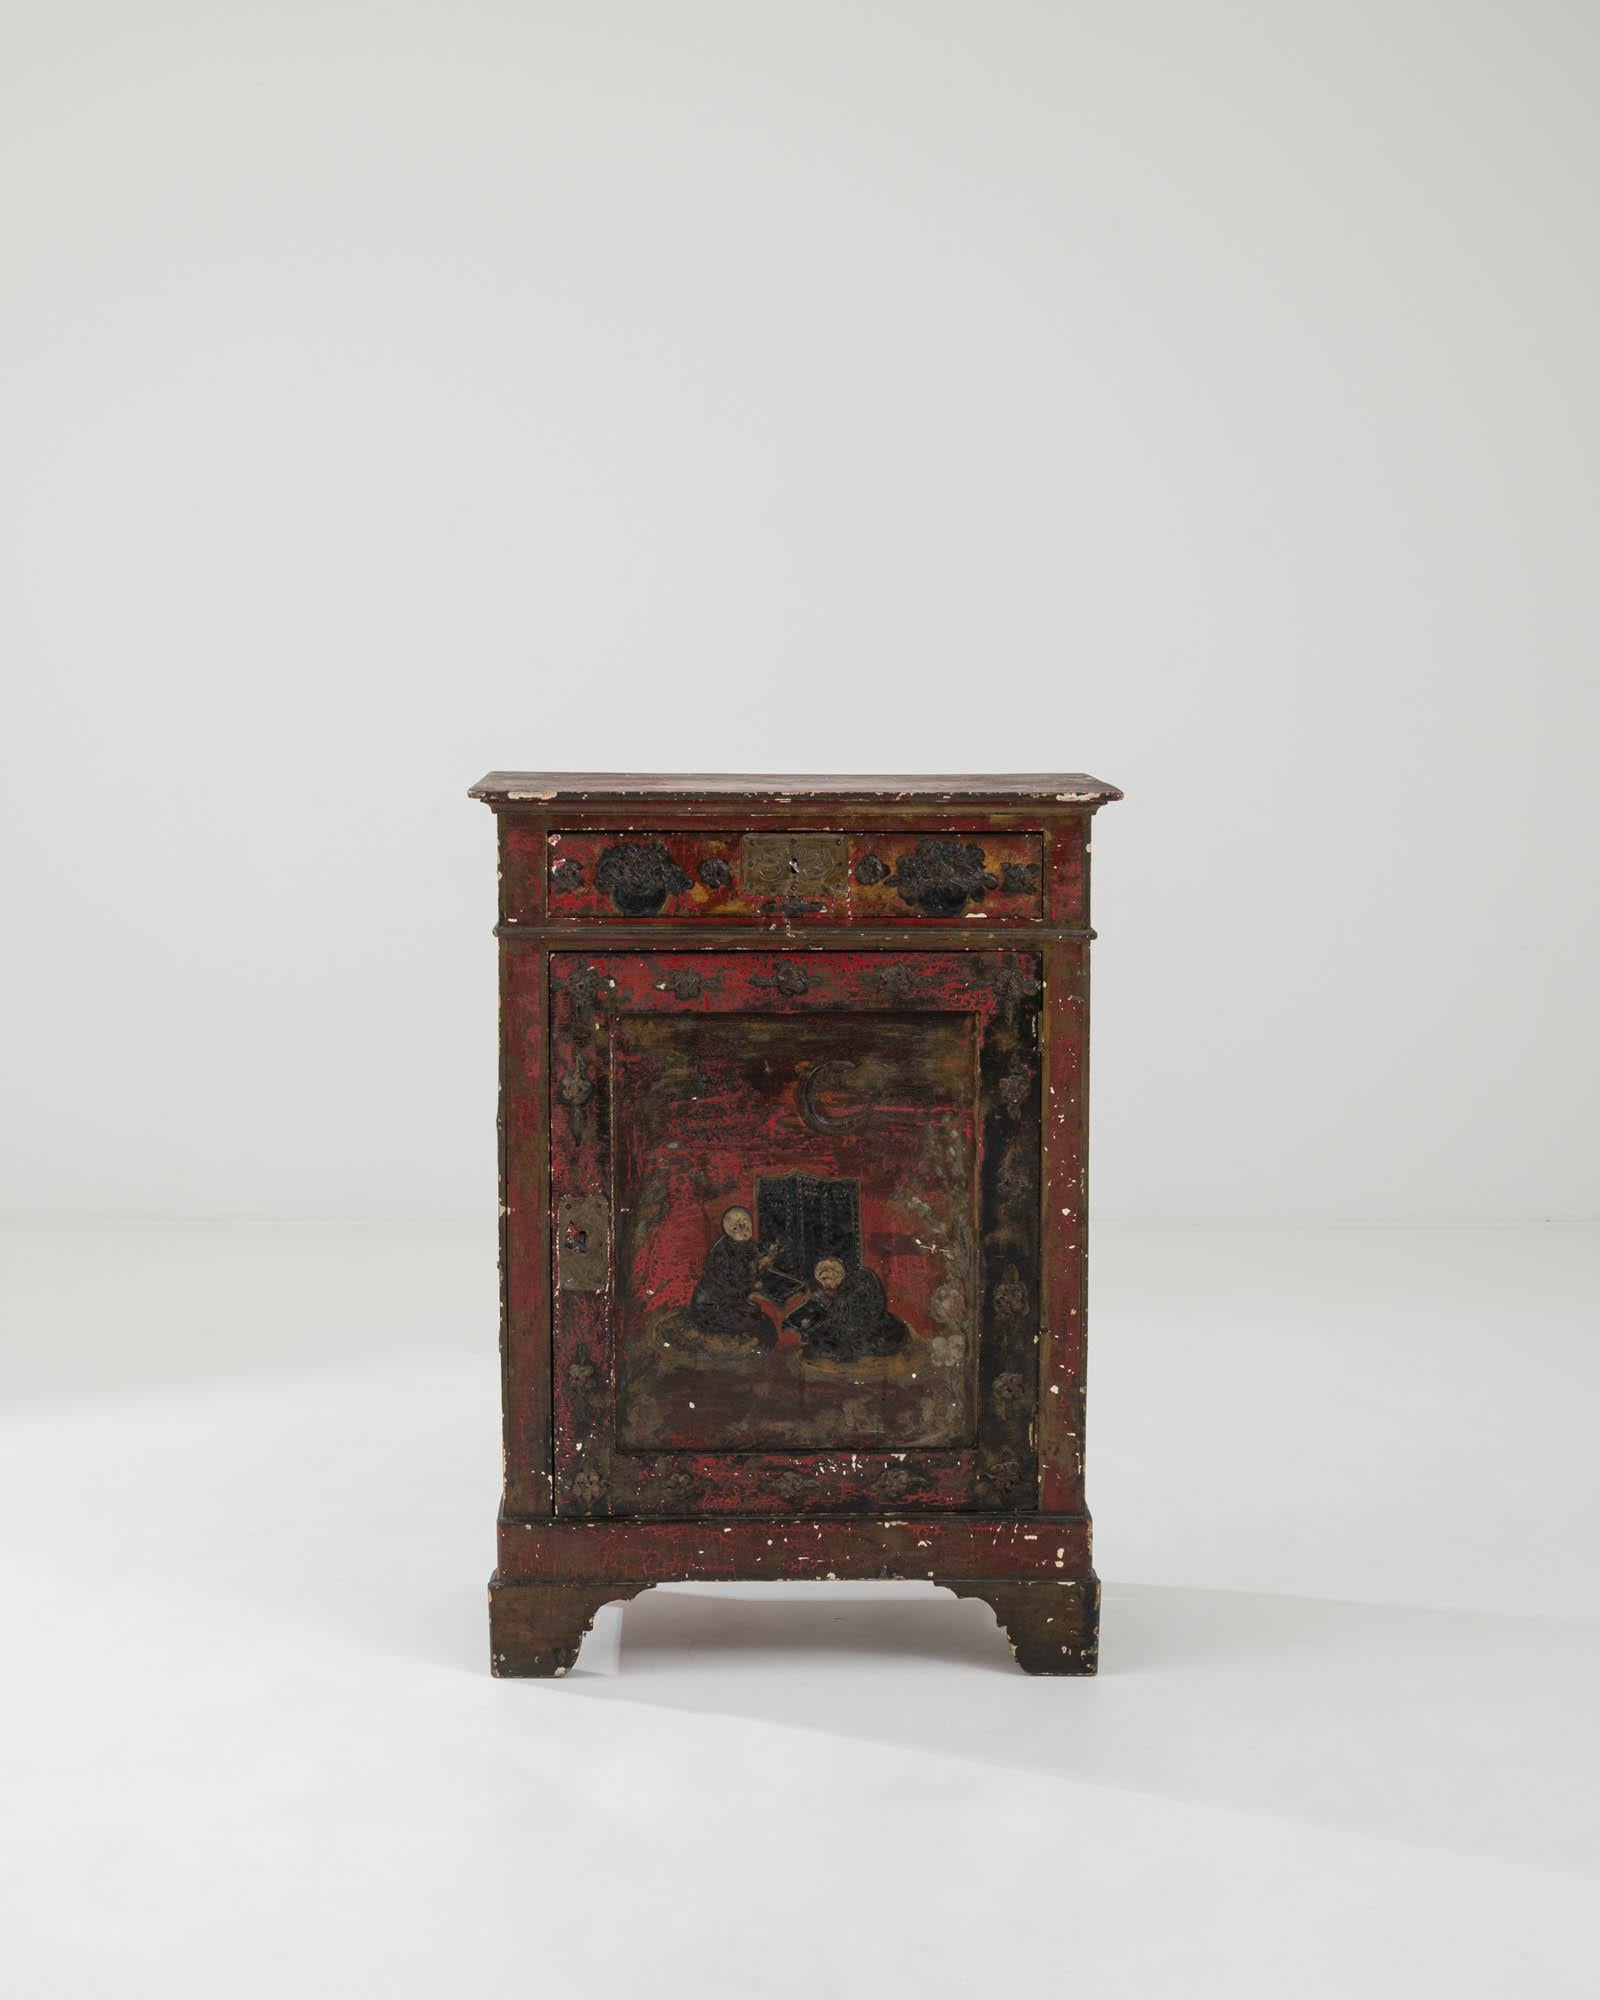 A weathered patina gives this vintage wooden buffet an air of romantic mystery. Built in China at the turn of the century, the cabinet is richly decorated with motifs of flowers and traditional scenes from Chinese paintings. The years have worn the